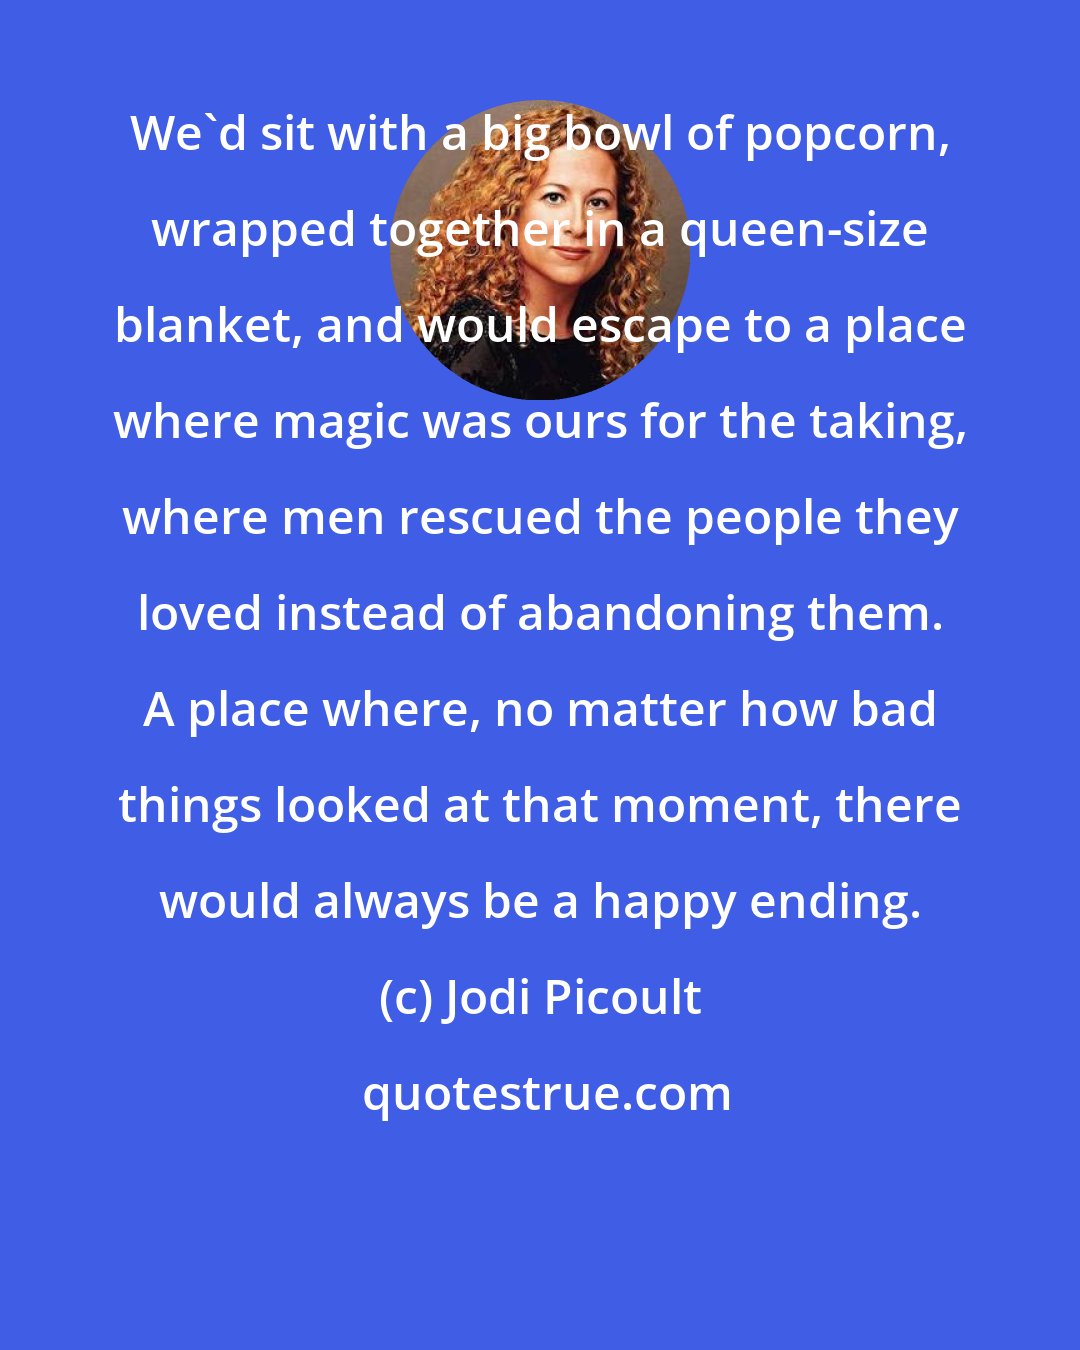 Jodi Picoult: We'd sit with a big bowl of popcorn, wrapped together in a queen-size blanket, and would escape to a place where magic was ours for the taking, where men rescued the people they loved instead of abandoning them. A place where, no matter how bad things looked at that moment, there would always be a happy ending.